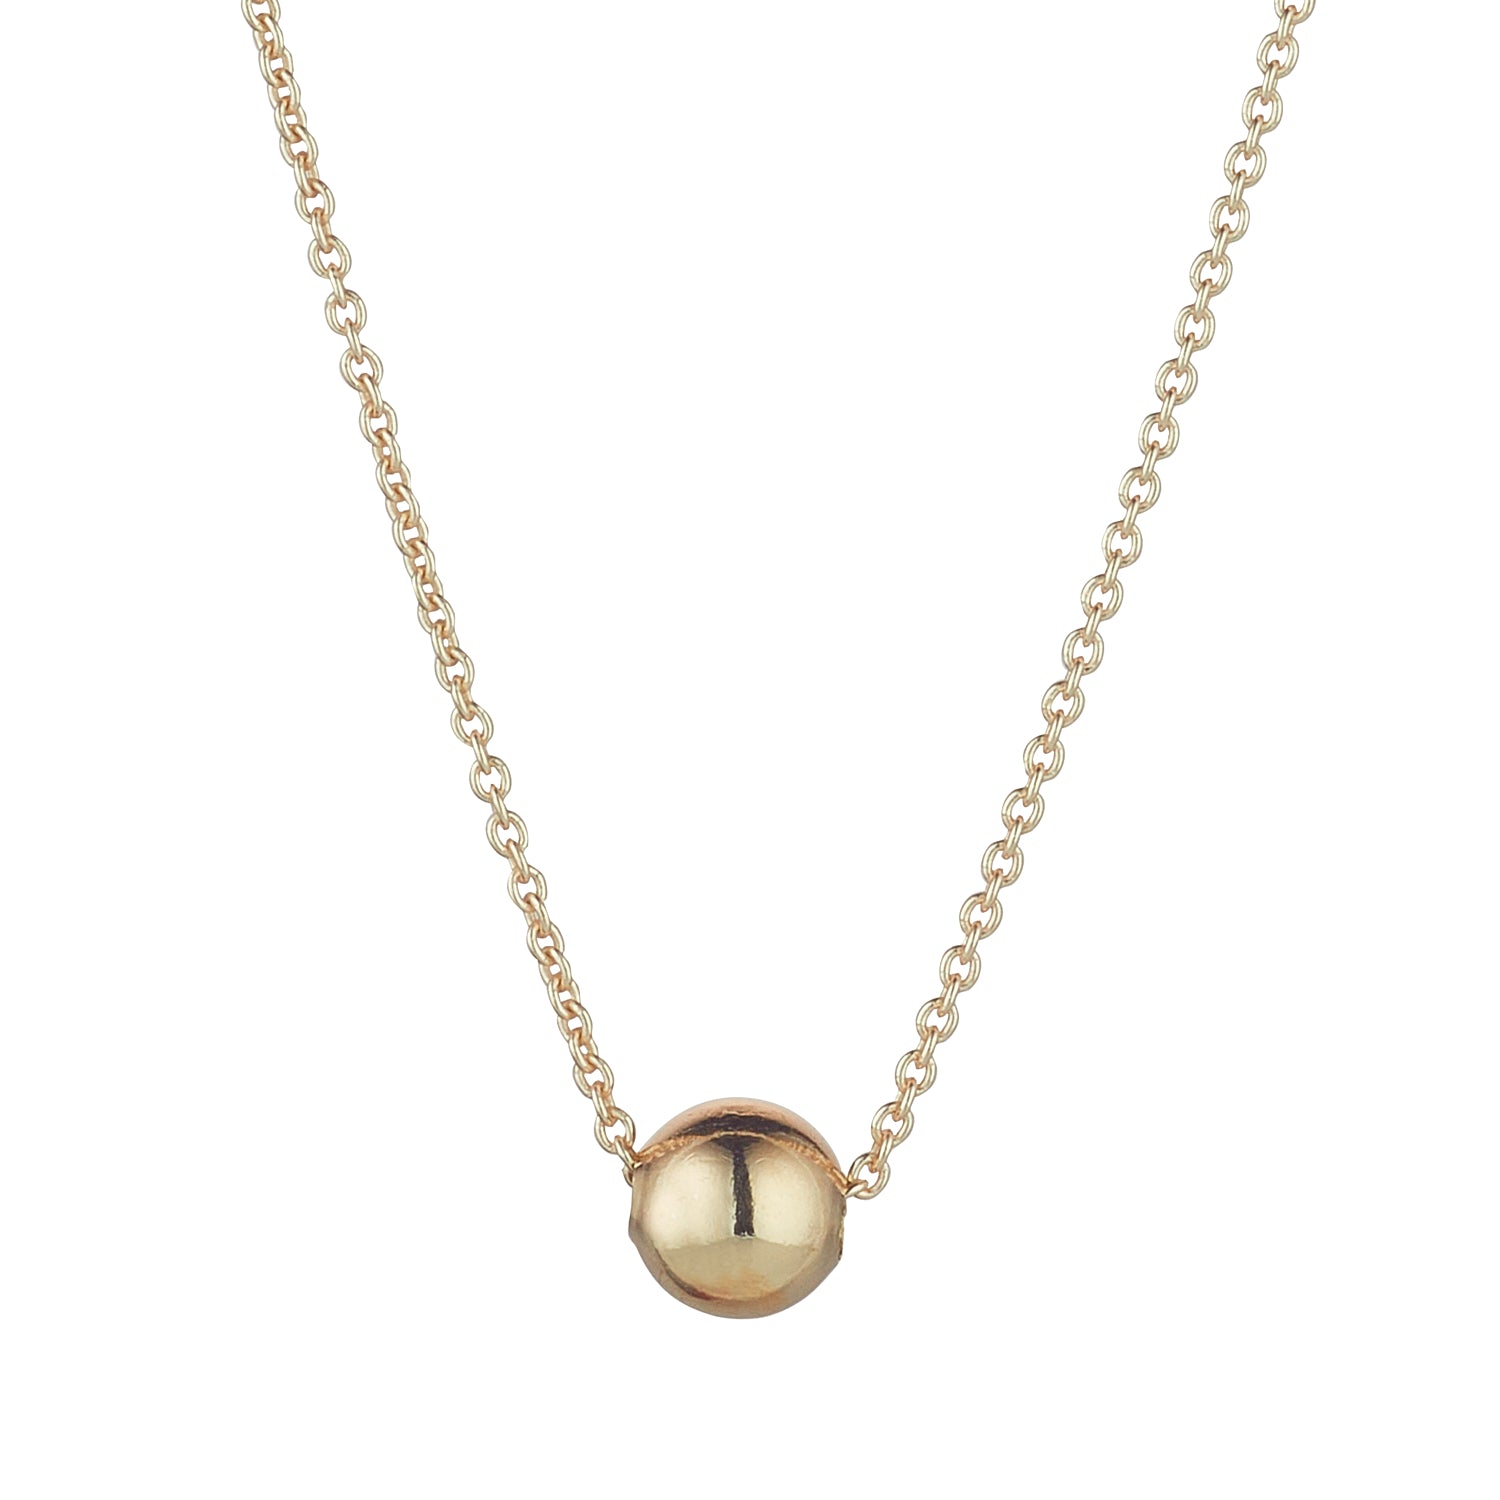 18ct Rose Gold Ball Pendant Necklace l Auric Jewellery, UK